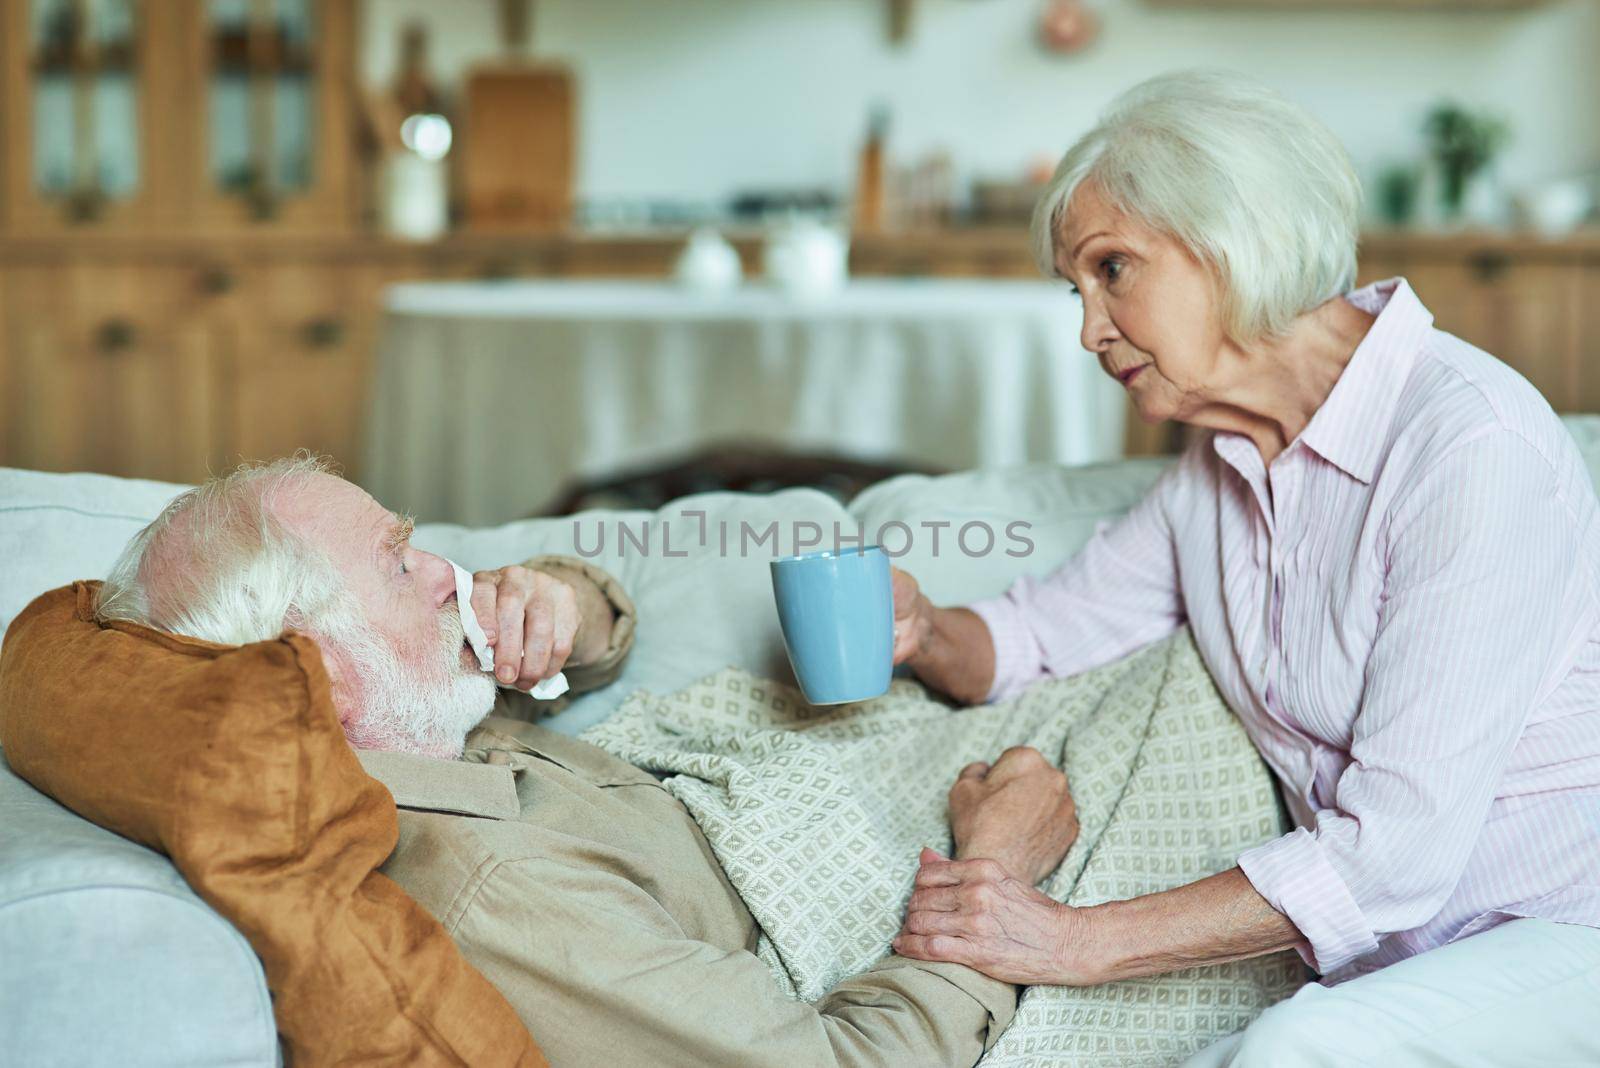 Senior woman taking care of her spouse while holding cup of hot drink and sitting next to him. Care and health concept